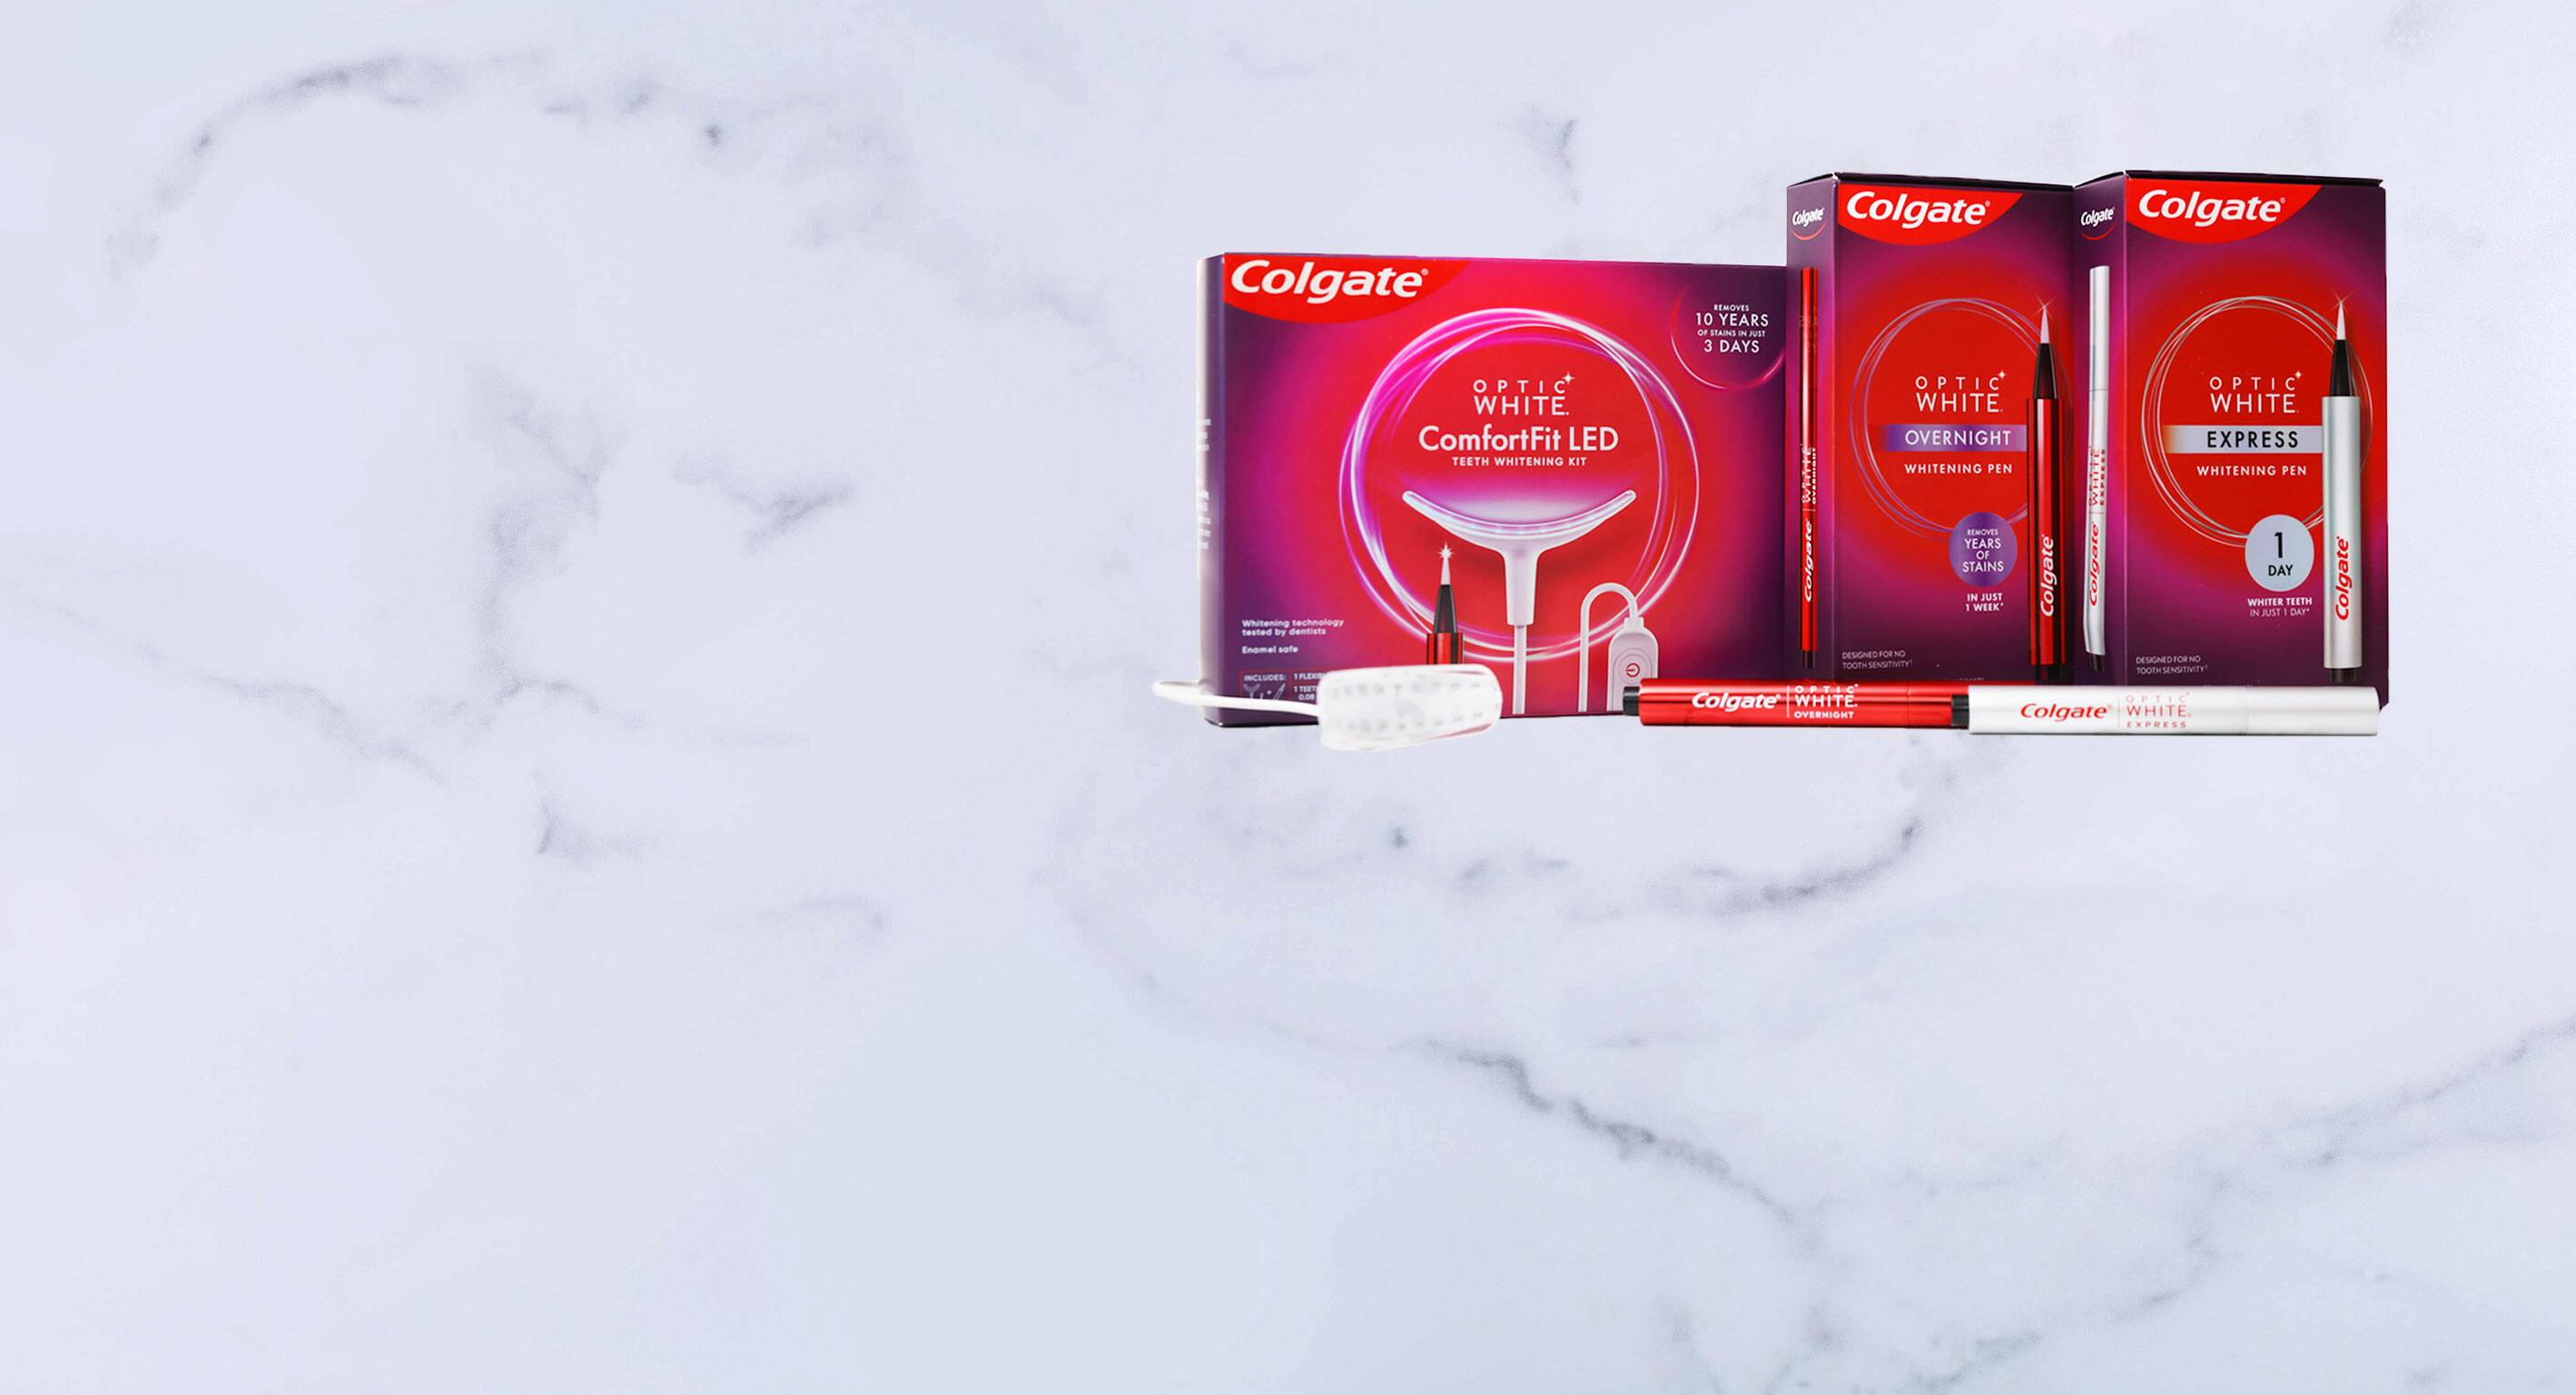 Colgate whitening products